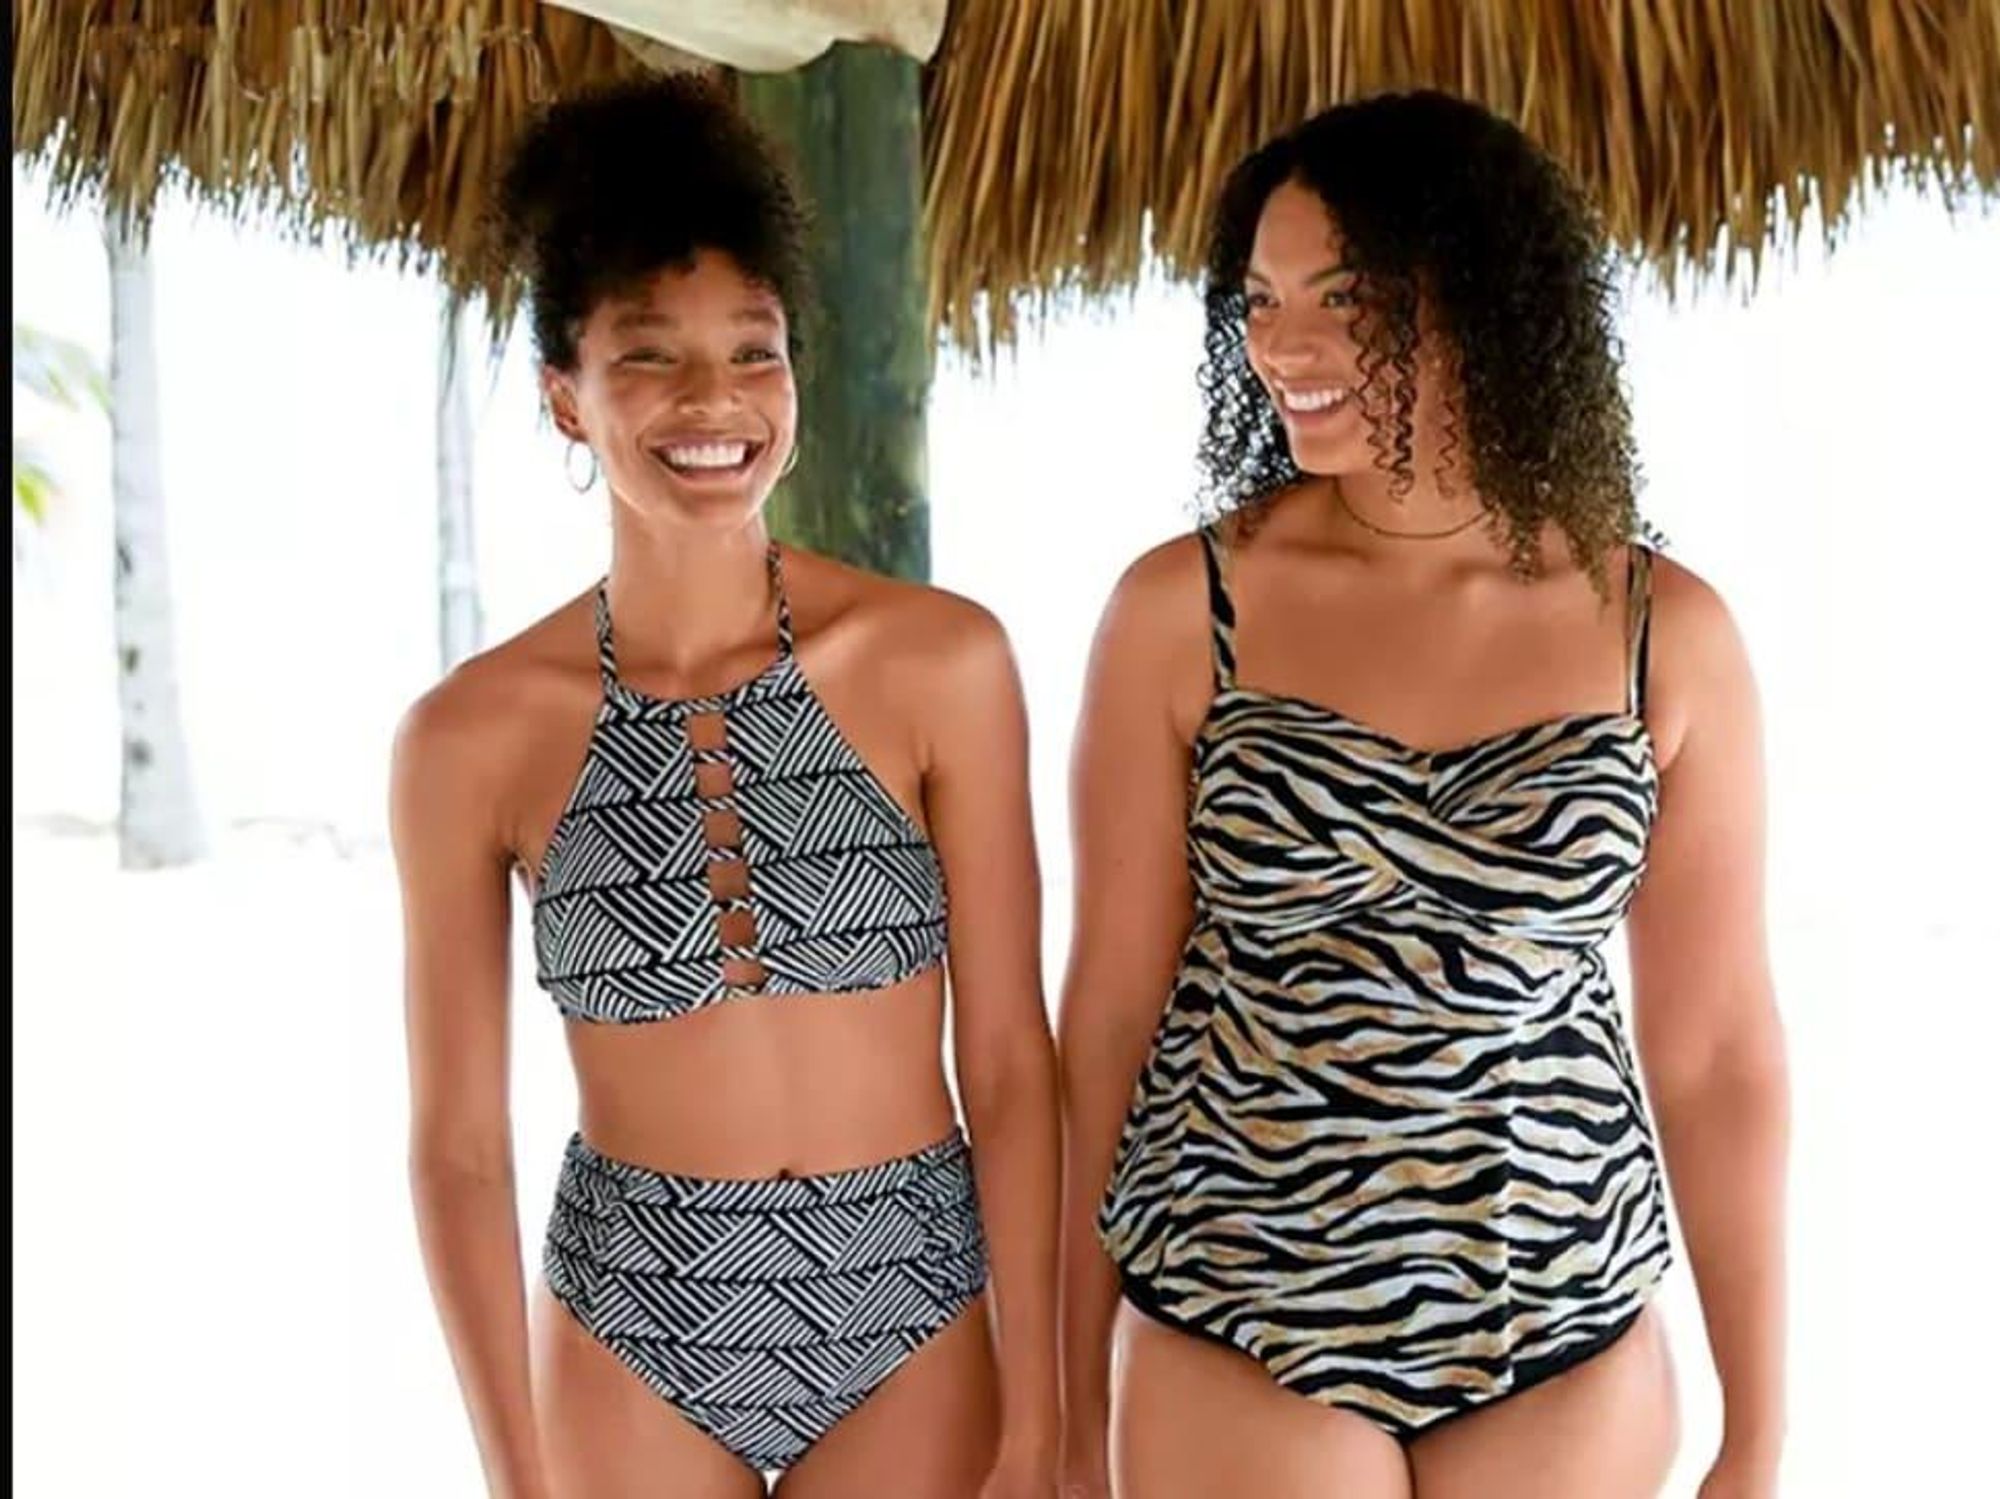 Cracking the code on the new line of swimsuits from Plano-based